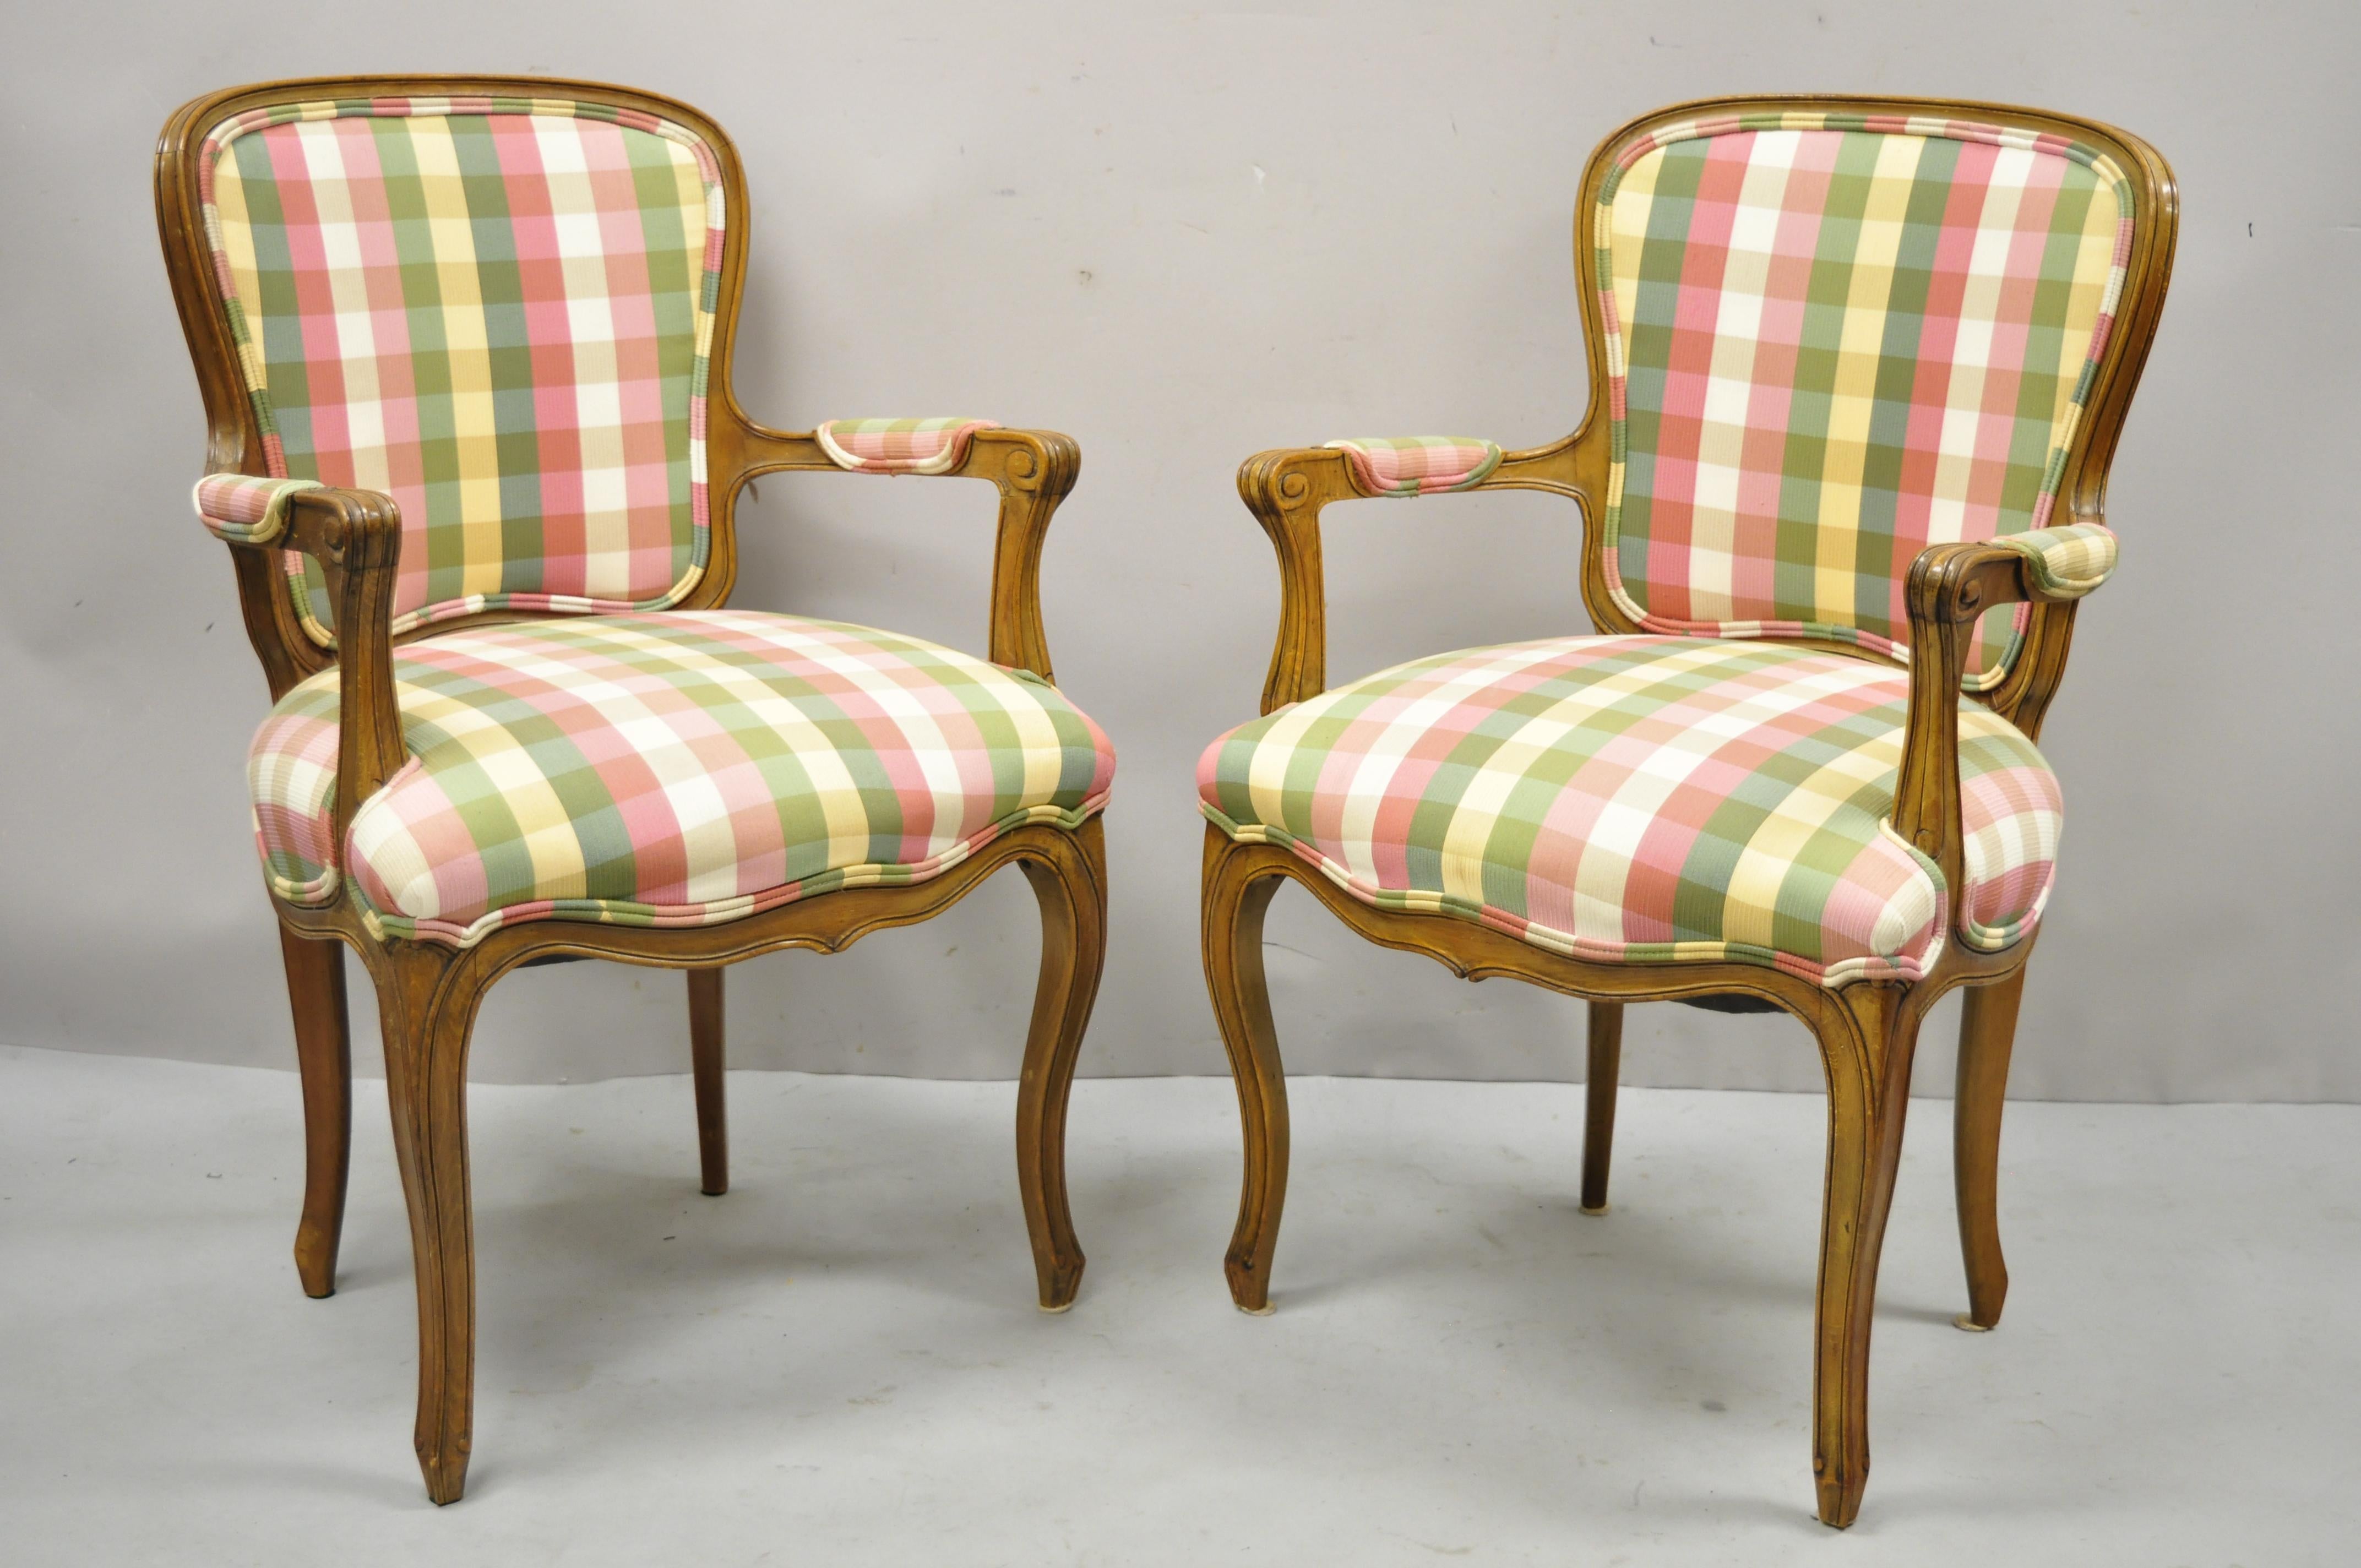 Vintage French Provincial Louis XV style fauteuil arm chairs by Simon Loscertales Bona - a Pair. Item features pink and green plaid upholstery, solid wood frame, distressed finish, original label, cabriole legs, very nice vintage pair, quality